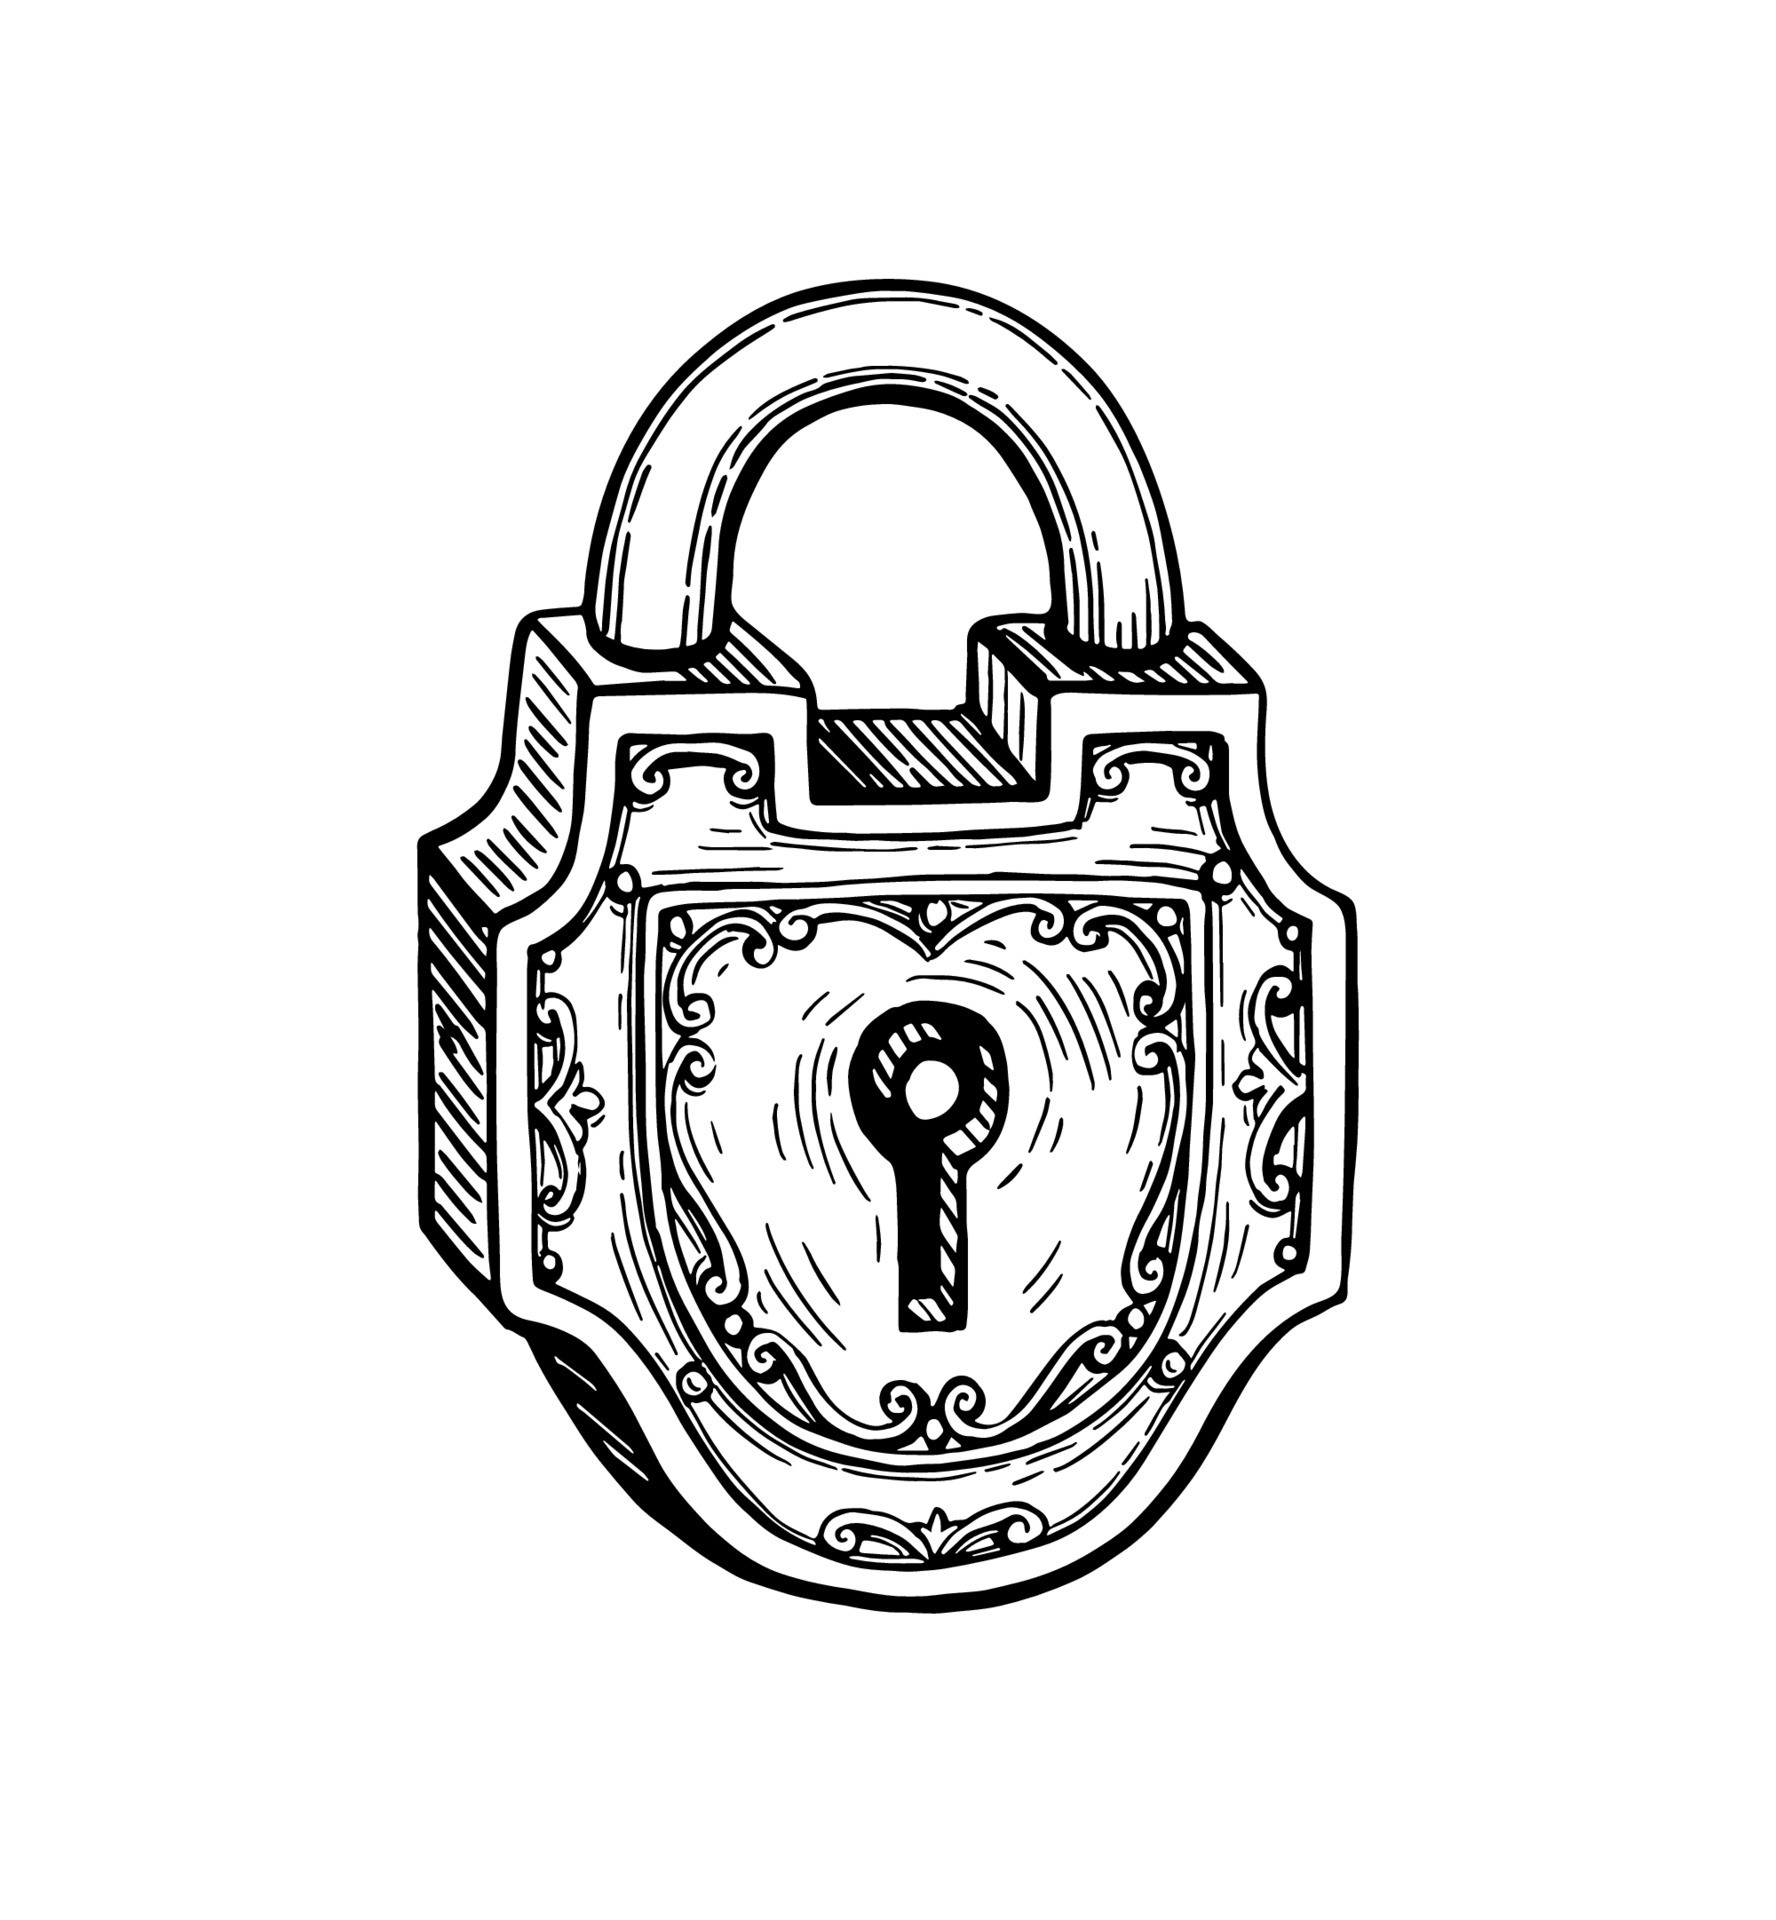 Lock Comments  Lock Drawing Png  804x980 PNG Download  PNGkit